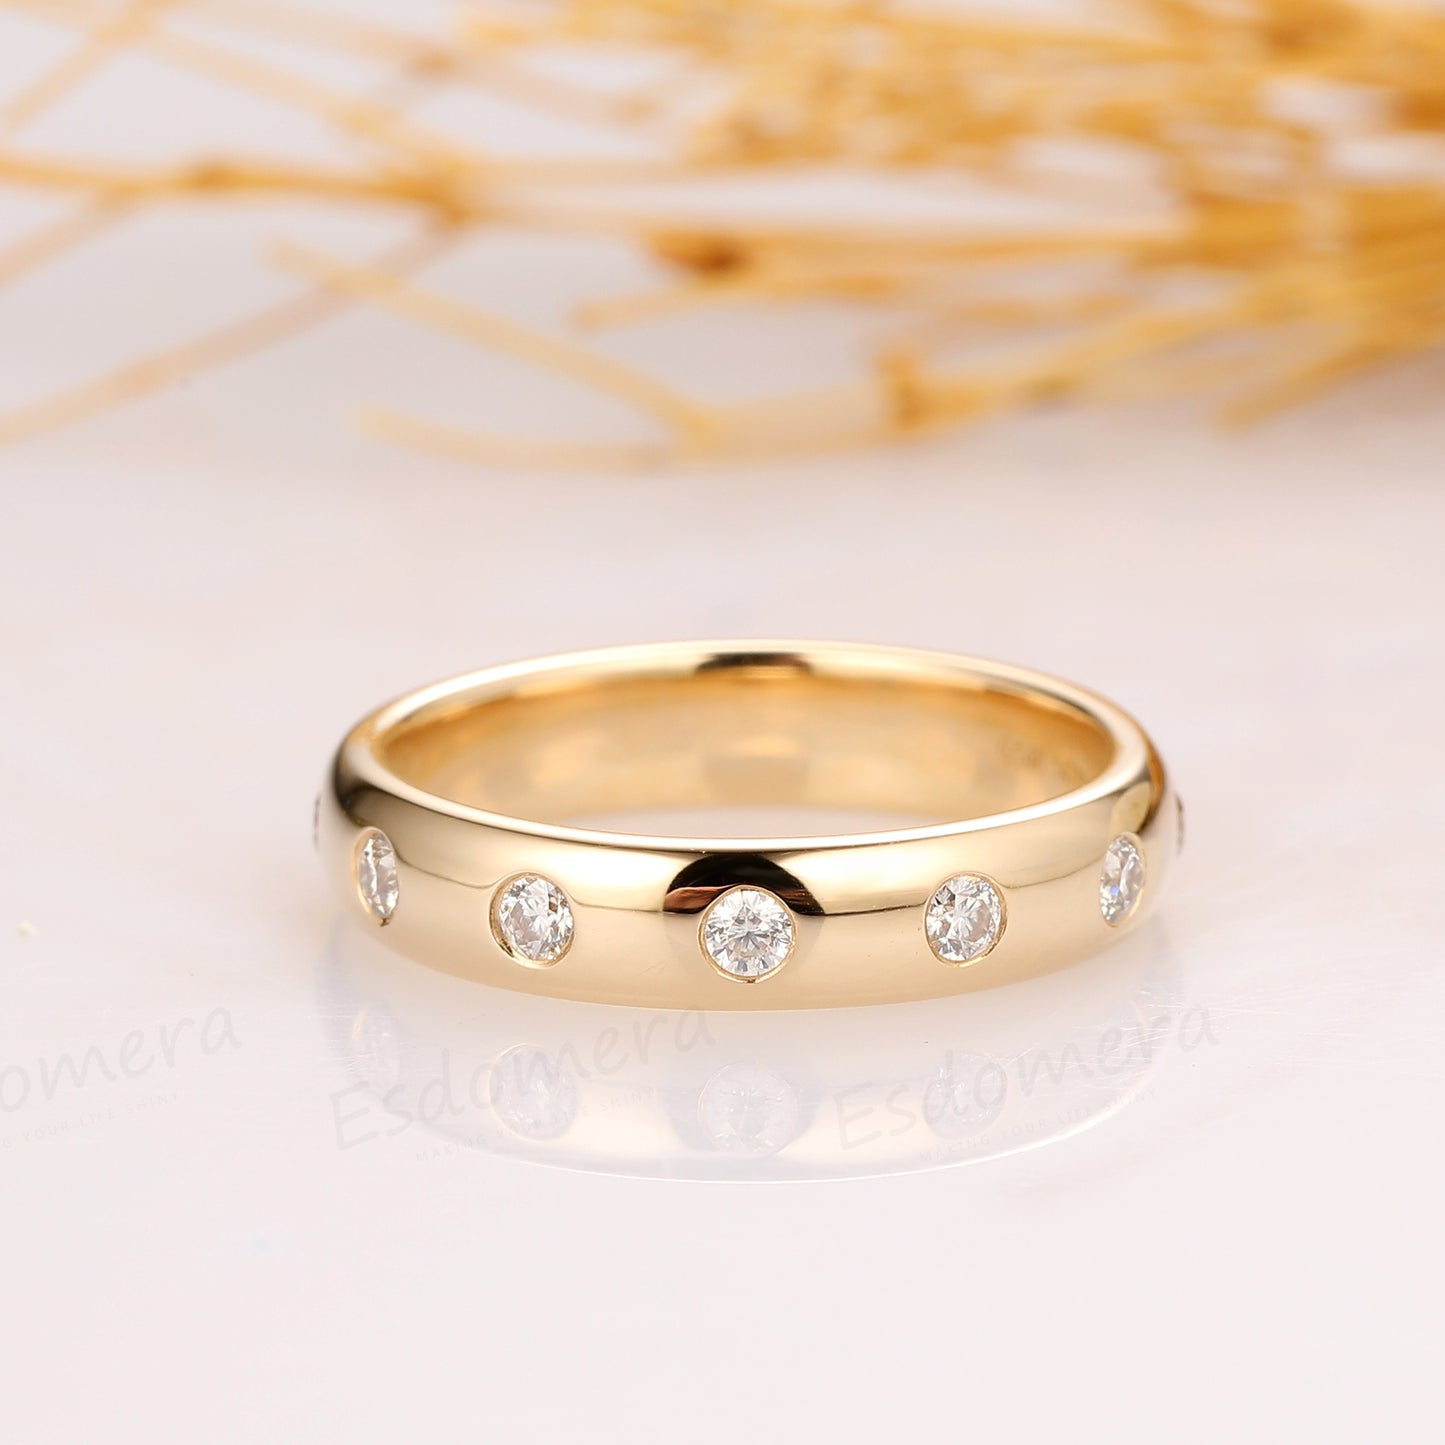 Solid 14K Yellow Gold Moissanite Wedding Band, Brilliant Moissanite Accents Ring